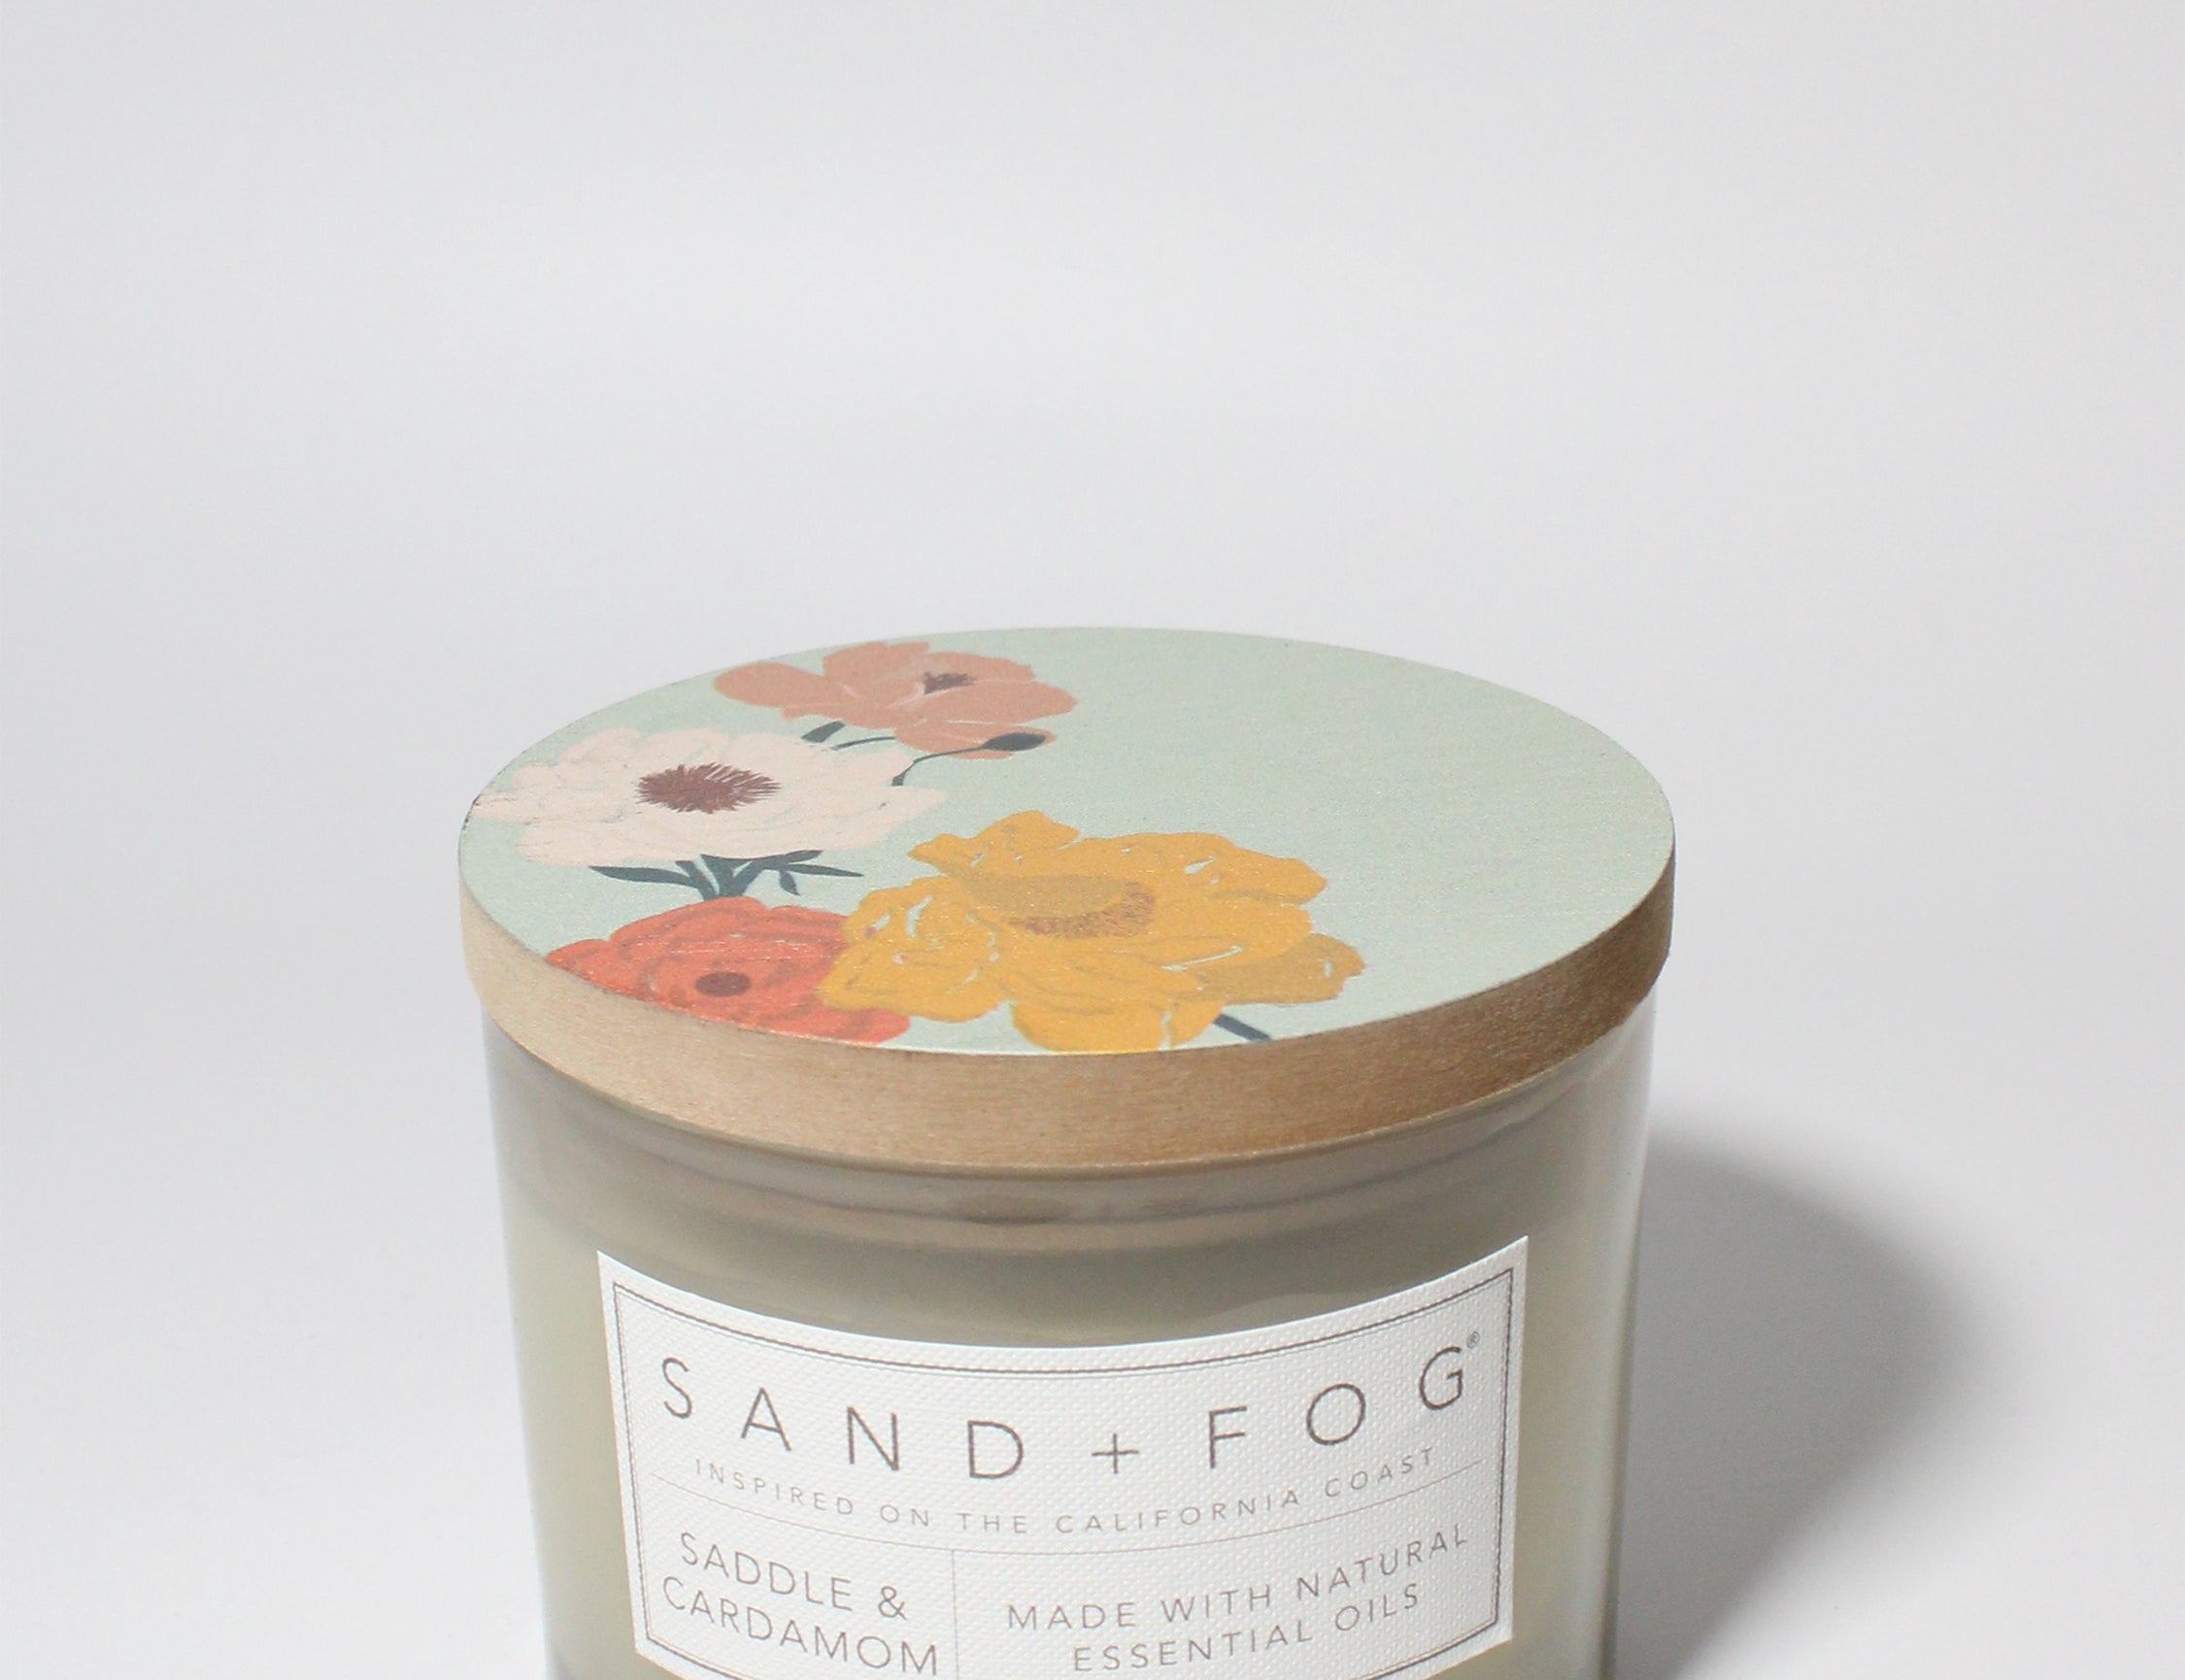 Saddle & Cardamom 12 oz scented candle Sand Dollar vessel with Painted Floral lid